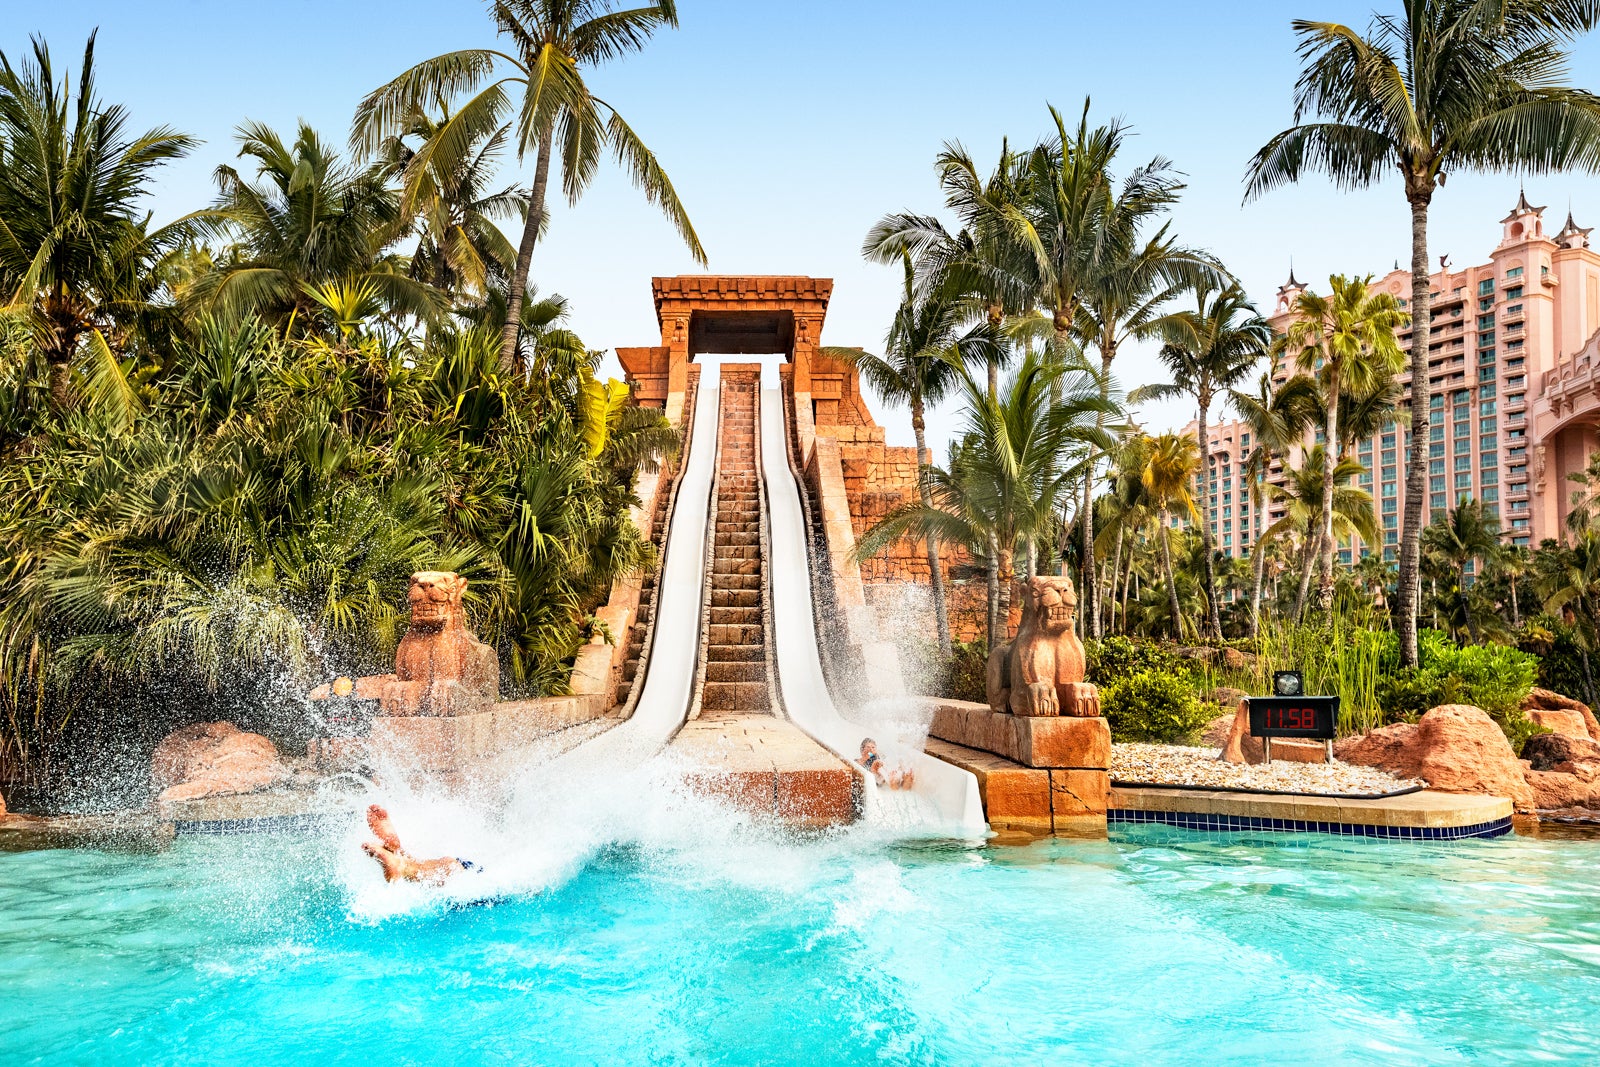 How I got my family access to Atlantis Paradise Island at a steep discount